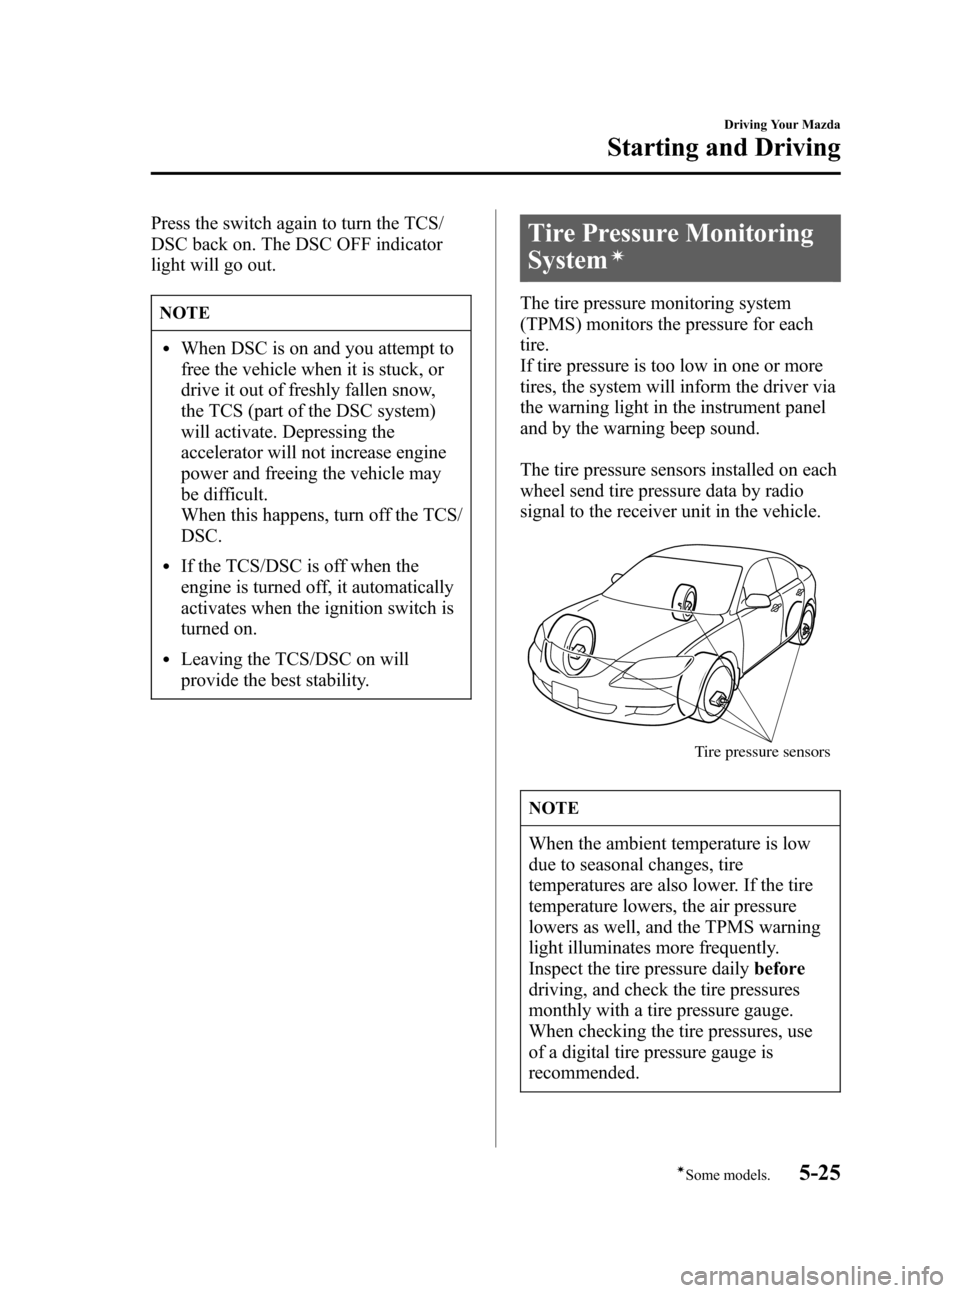 MAZDA MODEL 3 HATCHBACK 2007   (in English) Owners Guide Black plate (147,1)
Press the switch again to turn the TCS/
DSC back on. The DSC OFF indicator
light will go out.
NOTE
lWhen DSC is on and you attempt to
free the vehicle when it is stuck, or
drive it